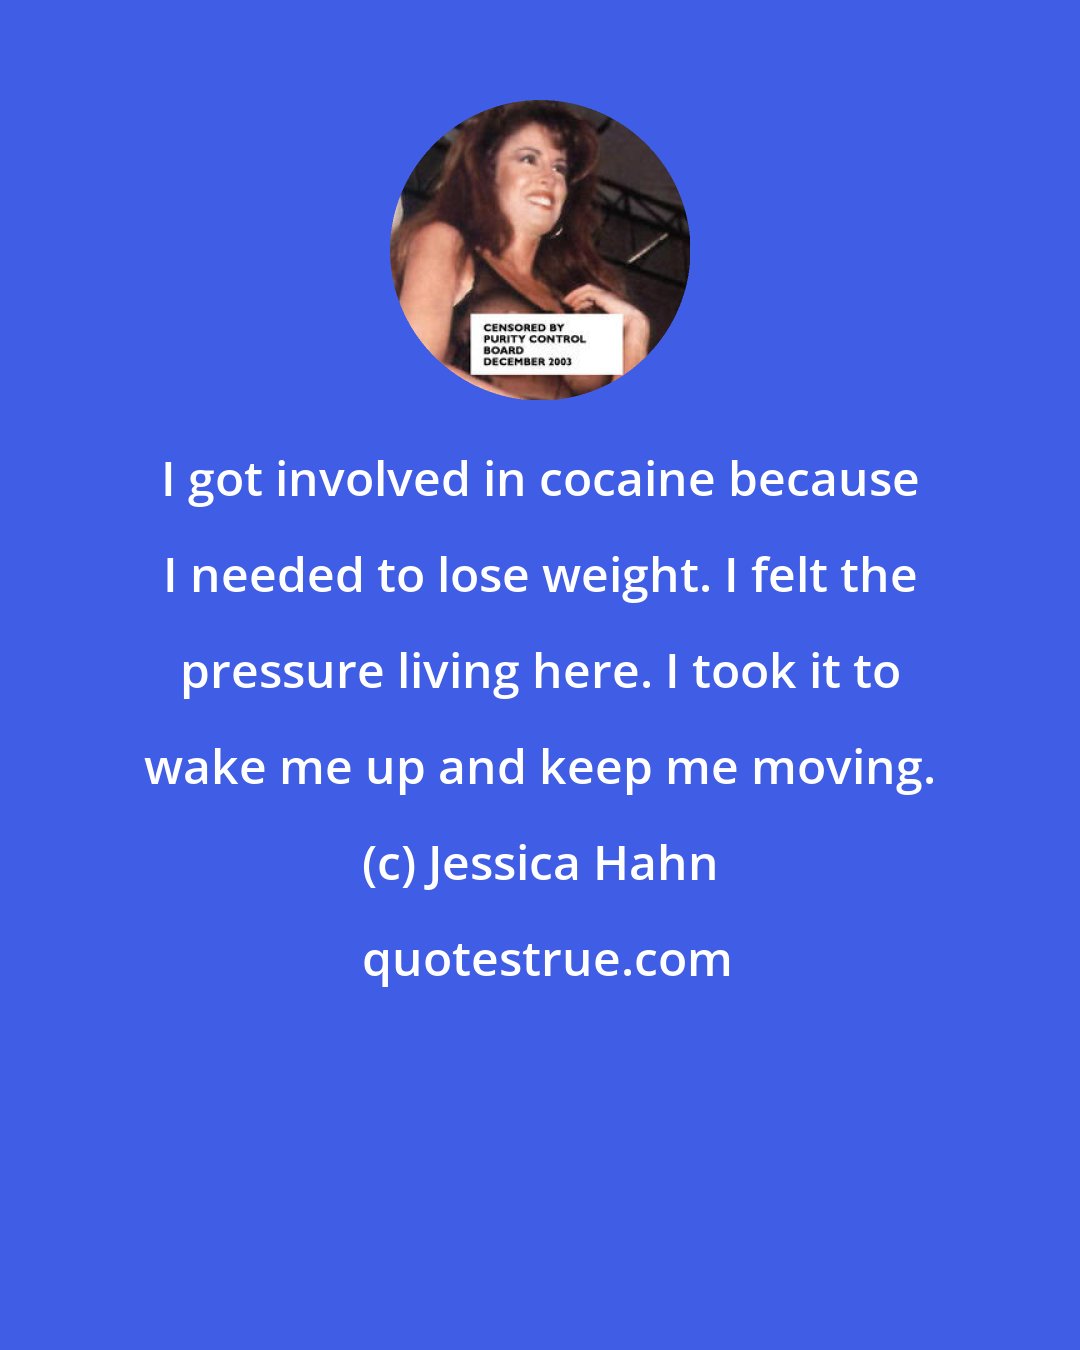 Jessica Hahn: I got involved in cocaine because I needed to lose weight. I felt the pressure living here. I took it to wake me up and keep me moving.